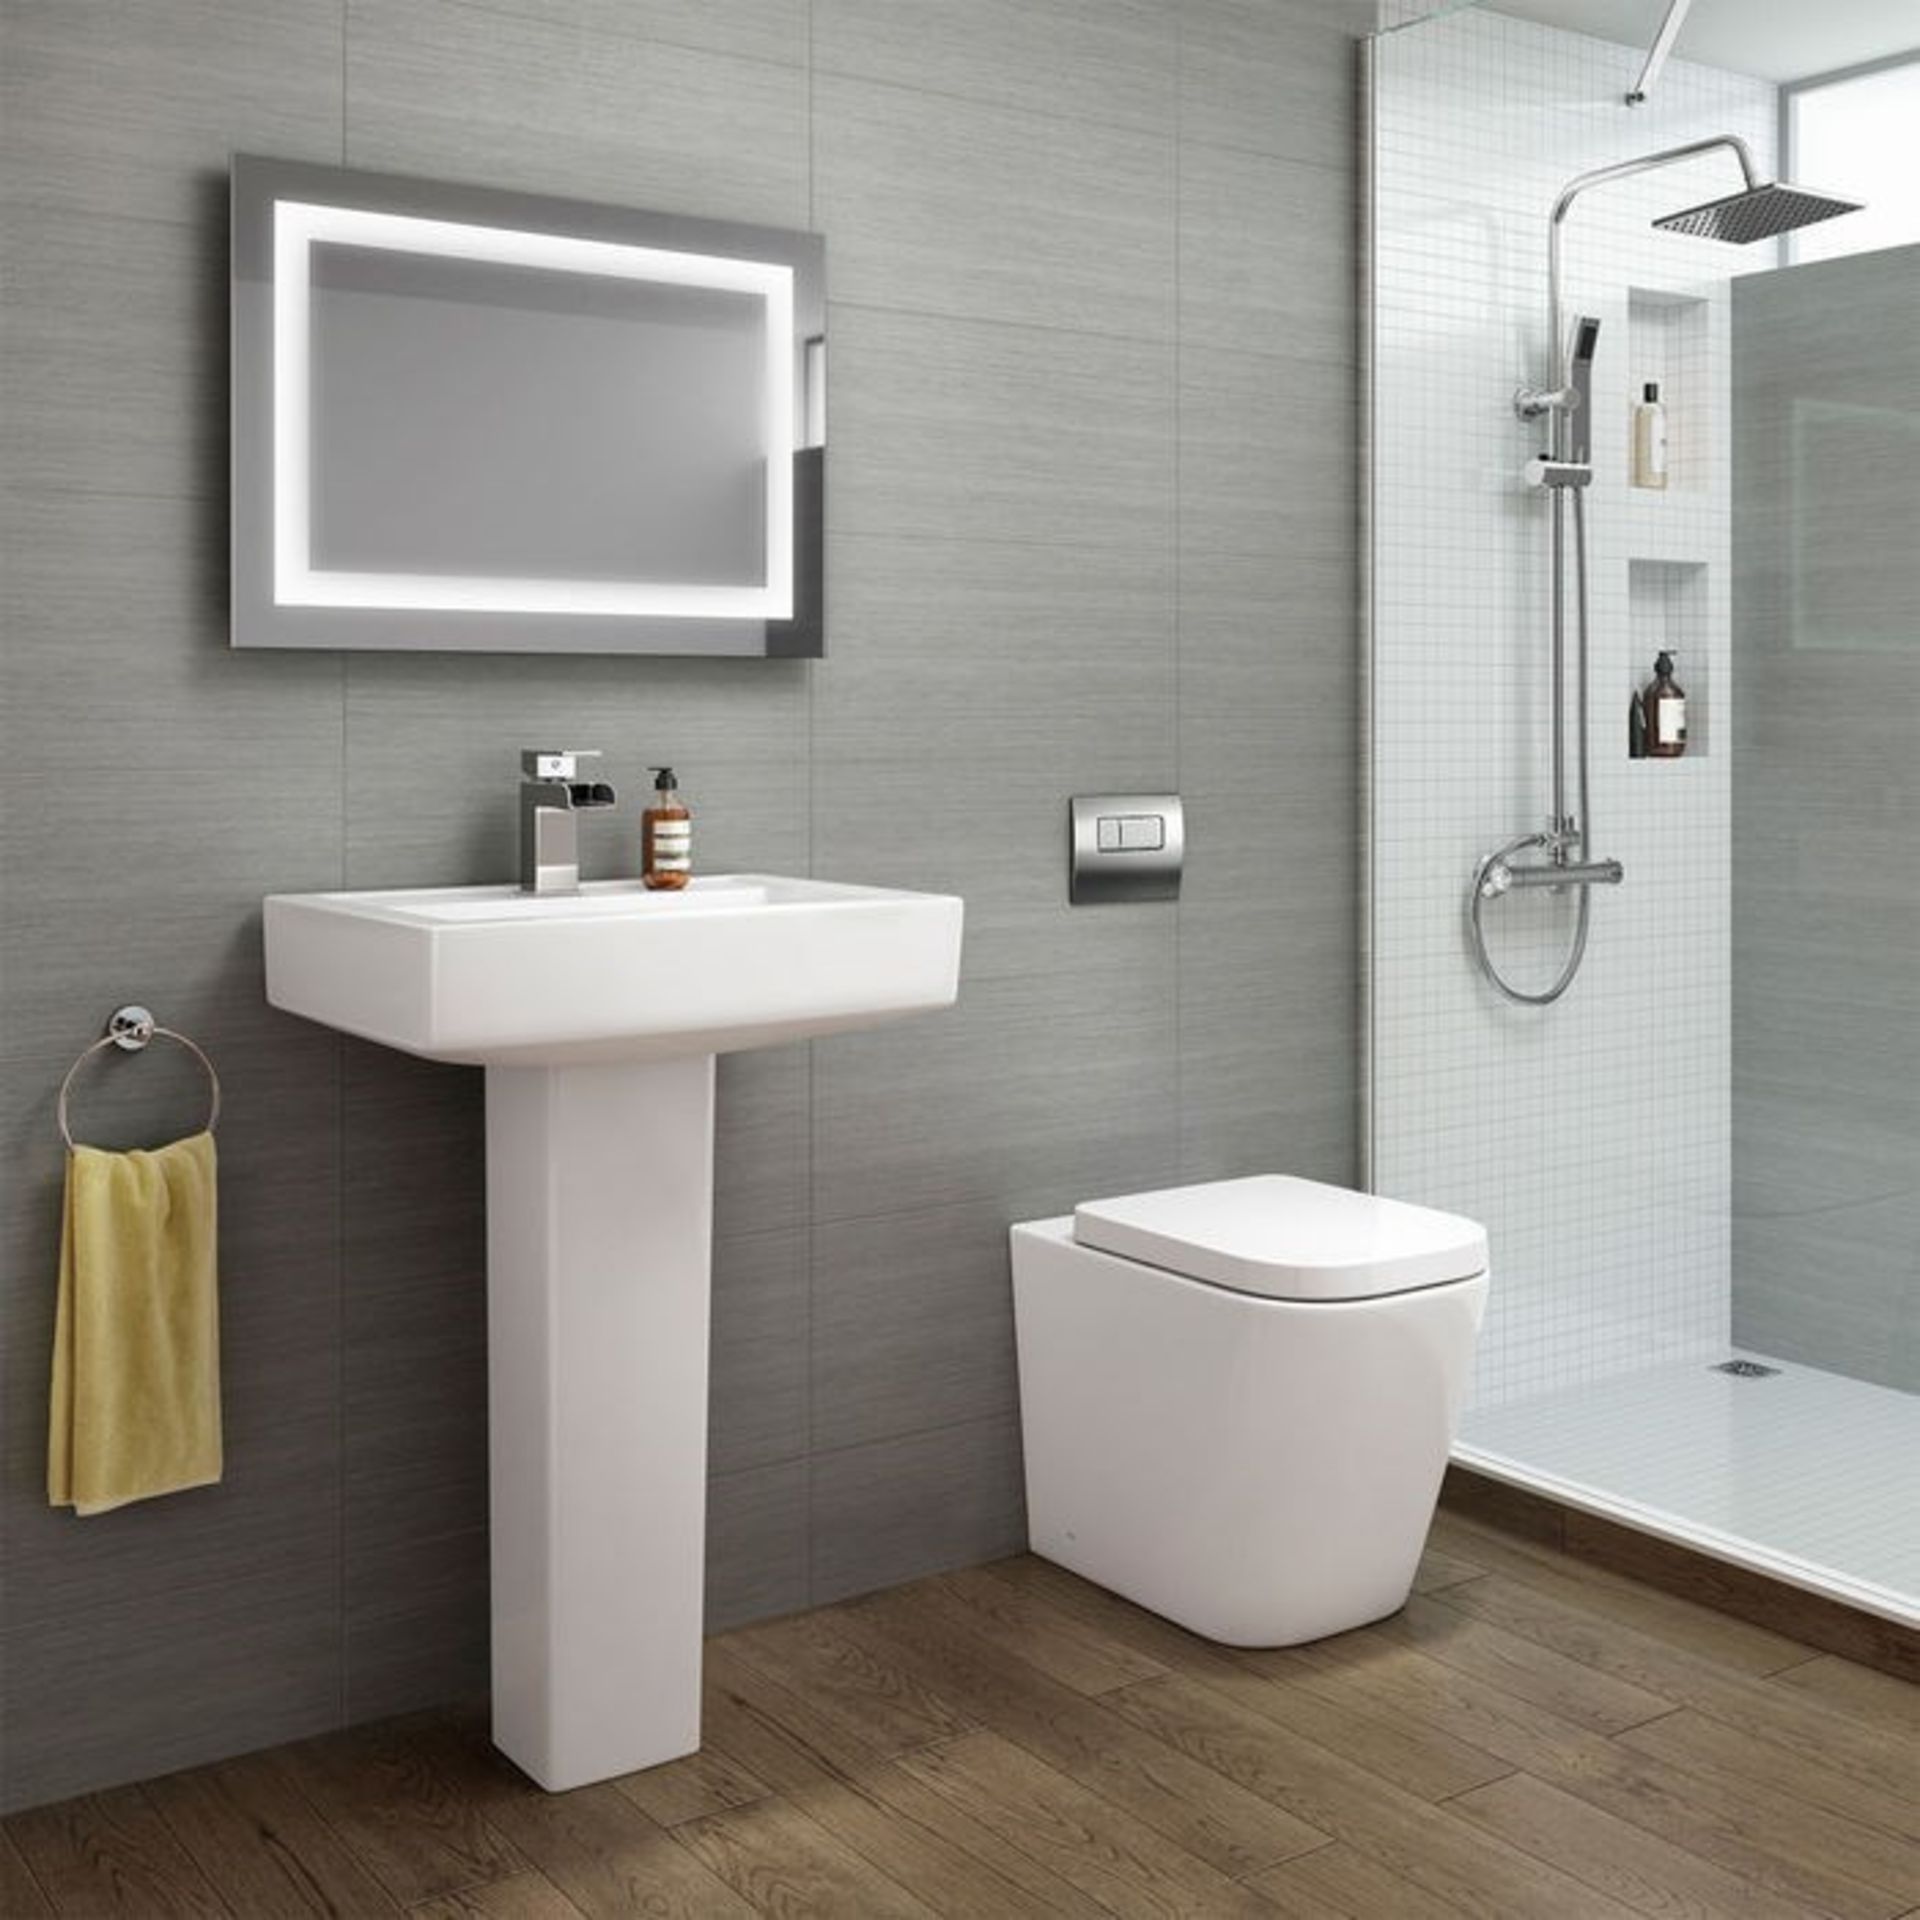 NEW & BOXED Florence Rimless Back to Wall Toilet inc Luxury Soft Close Seat.RRP £349.99 each.... - Image 2 of 2